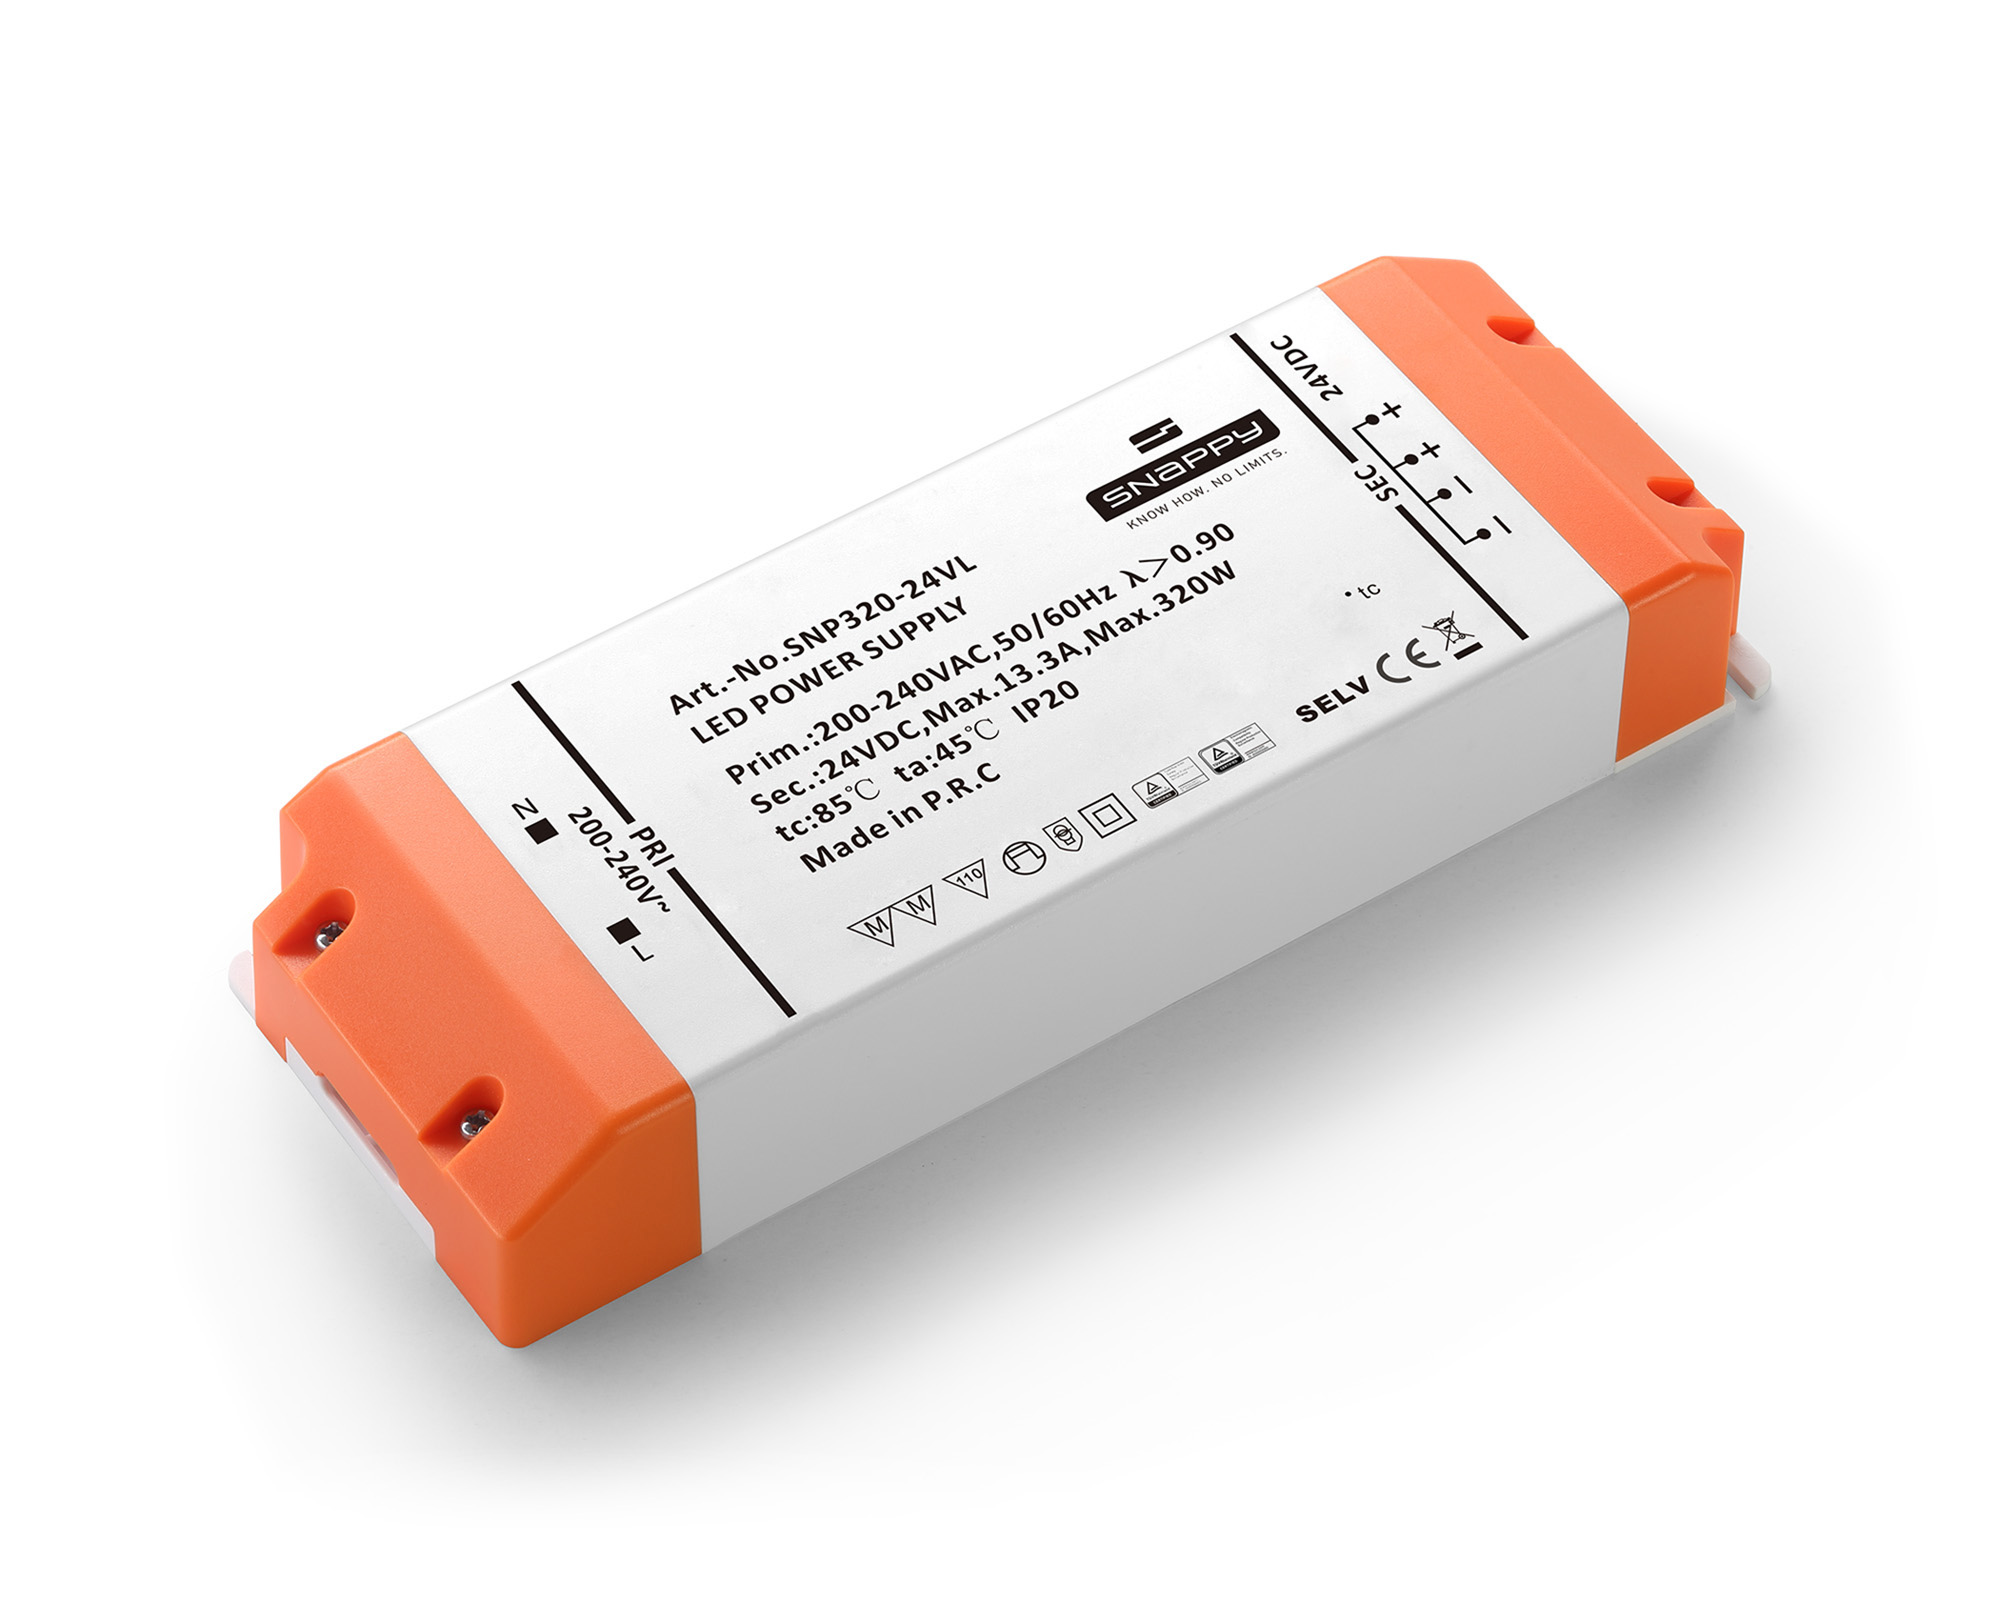 SNP320-24VL  SNP, 320W, Constant Voltage Non Dimmable PC Line type LED Driver, 24VDC, 13.3A, Pf>0.9, TC:+85?, TA:45?, IP20, Screw Connection, 3yrs Warranty.